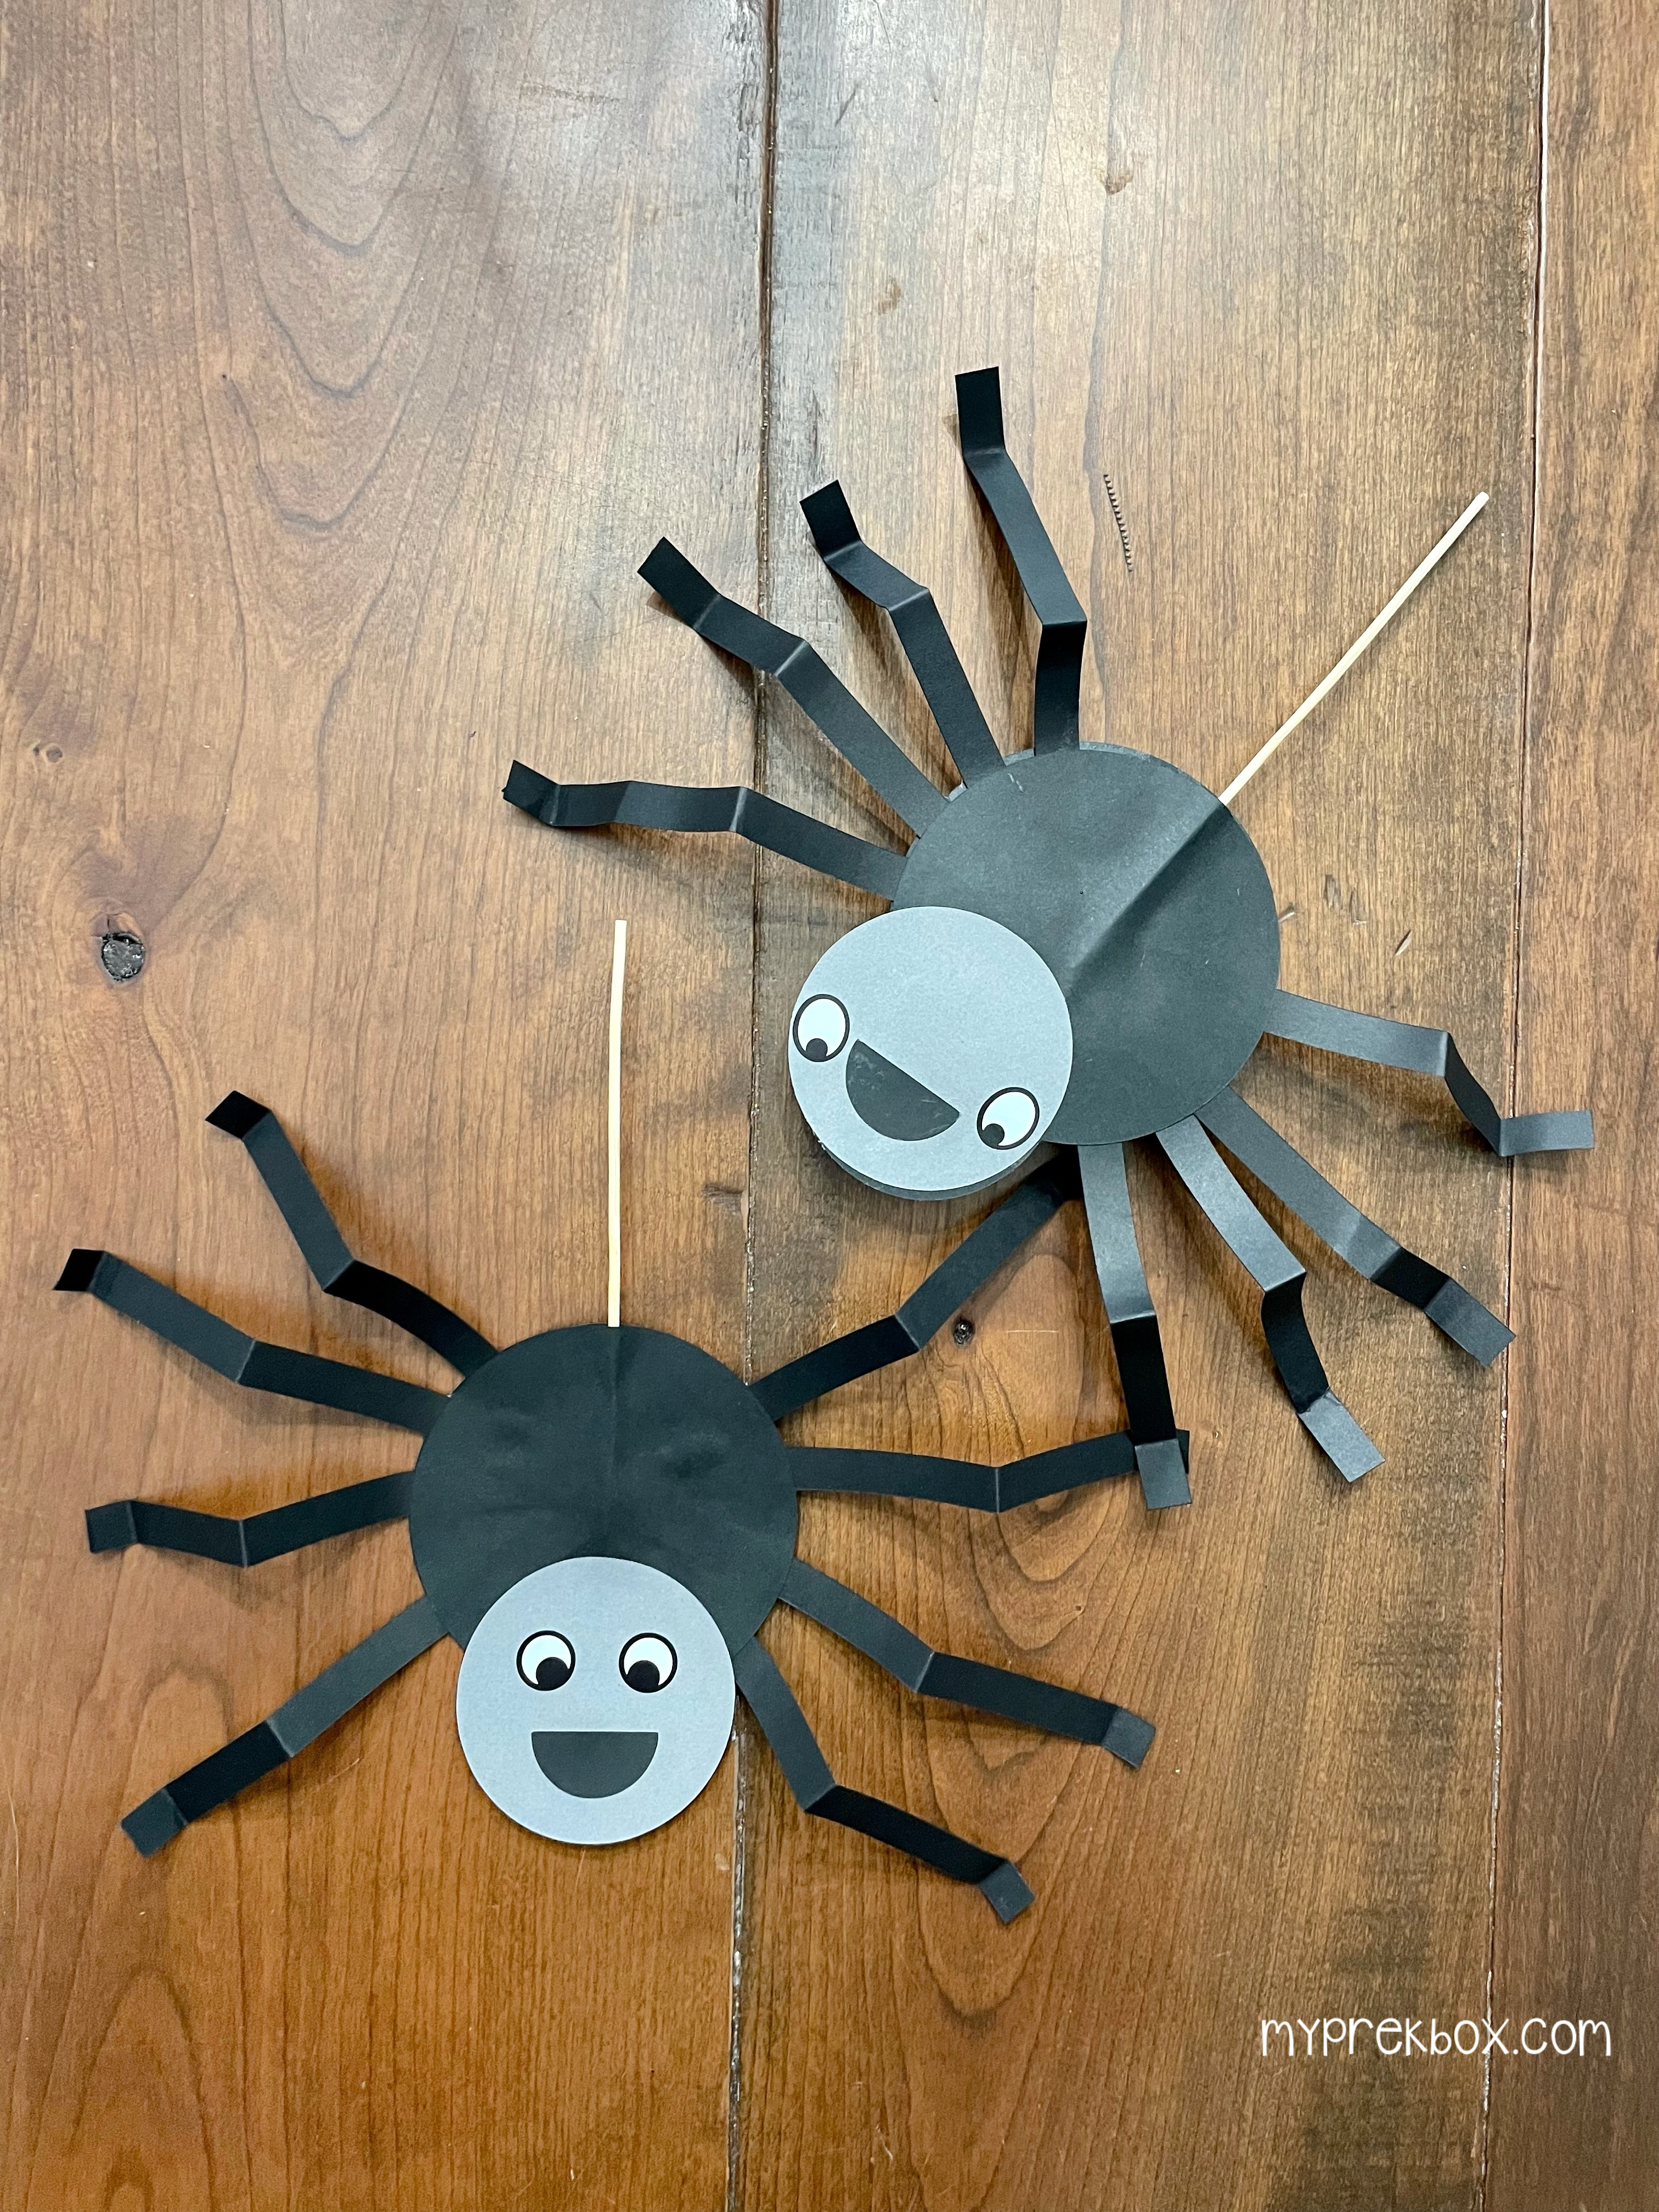 spider craft, two crafty spiders on a table